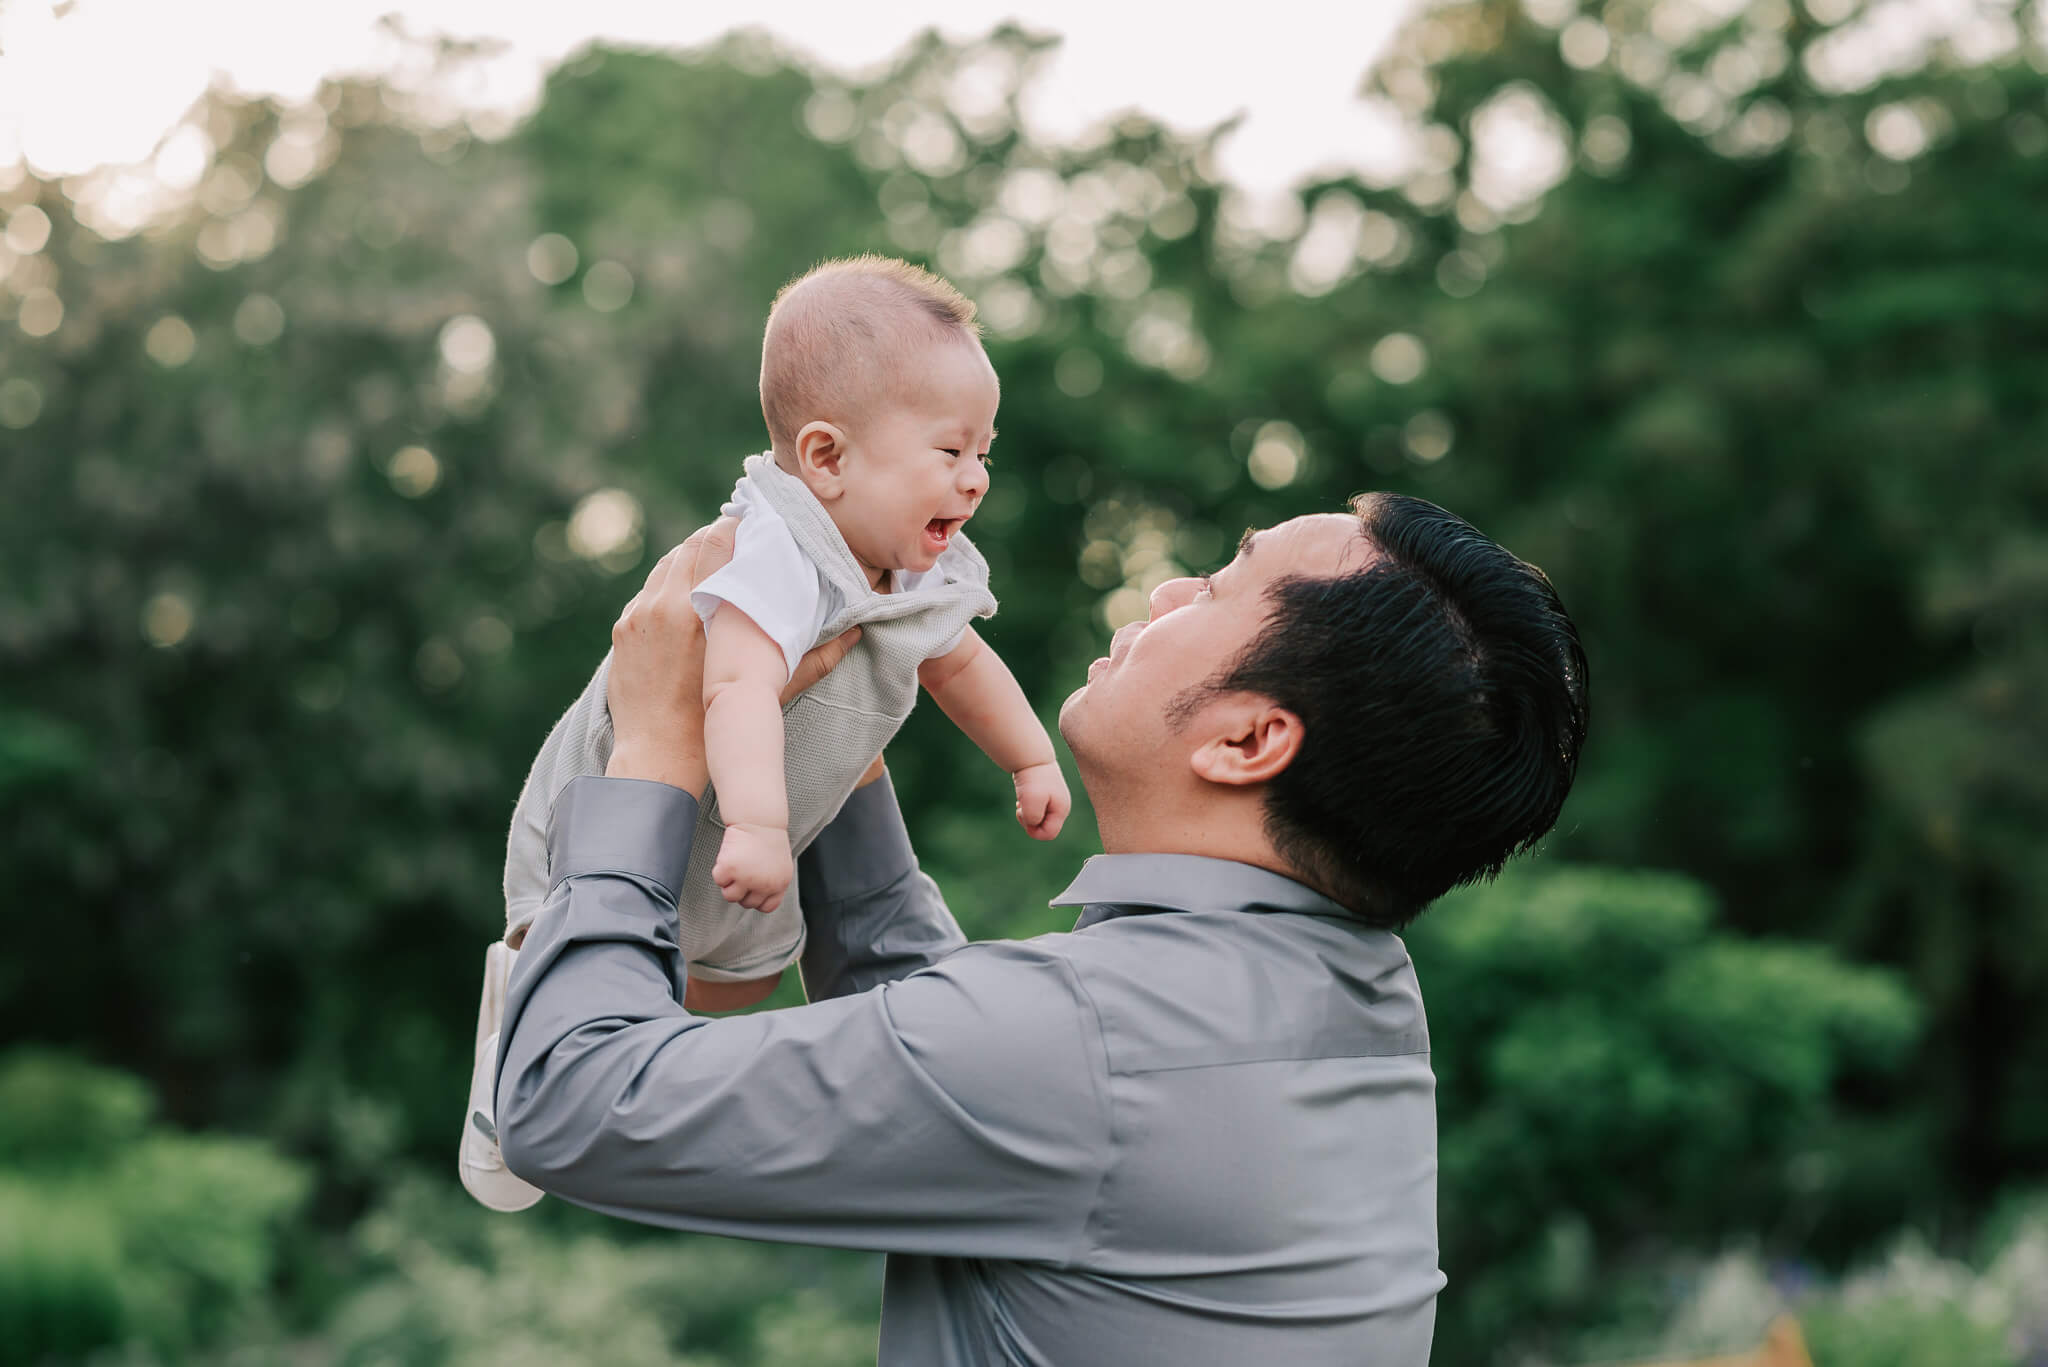 A dad lifts his baby son up into the air and earns a sweet smile from the baby, NOVA birth partners